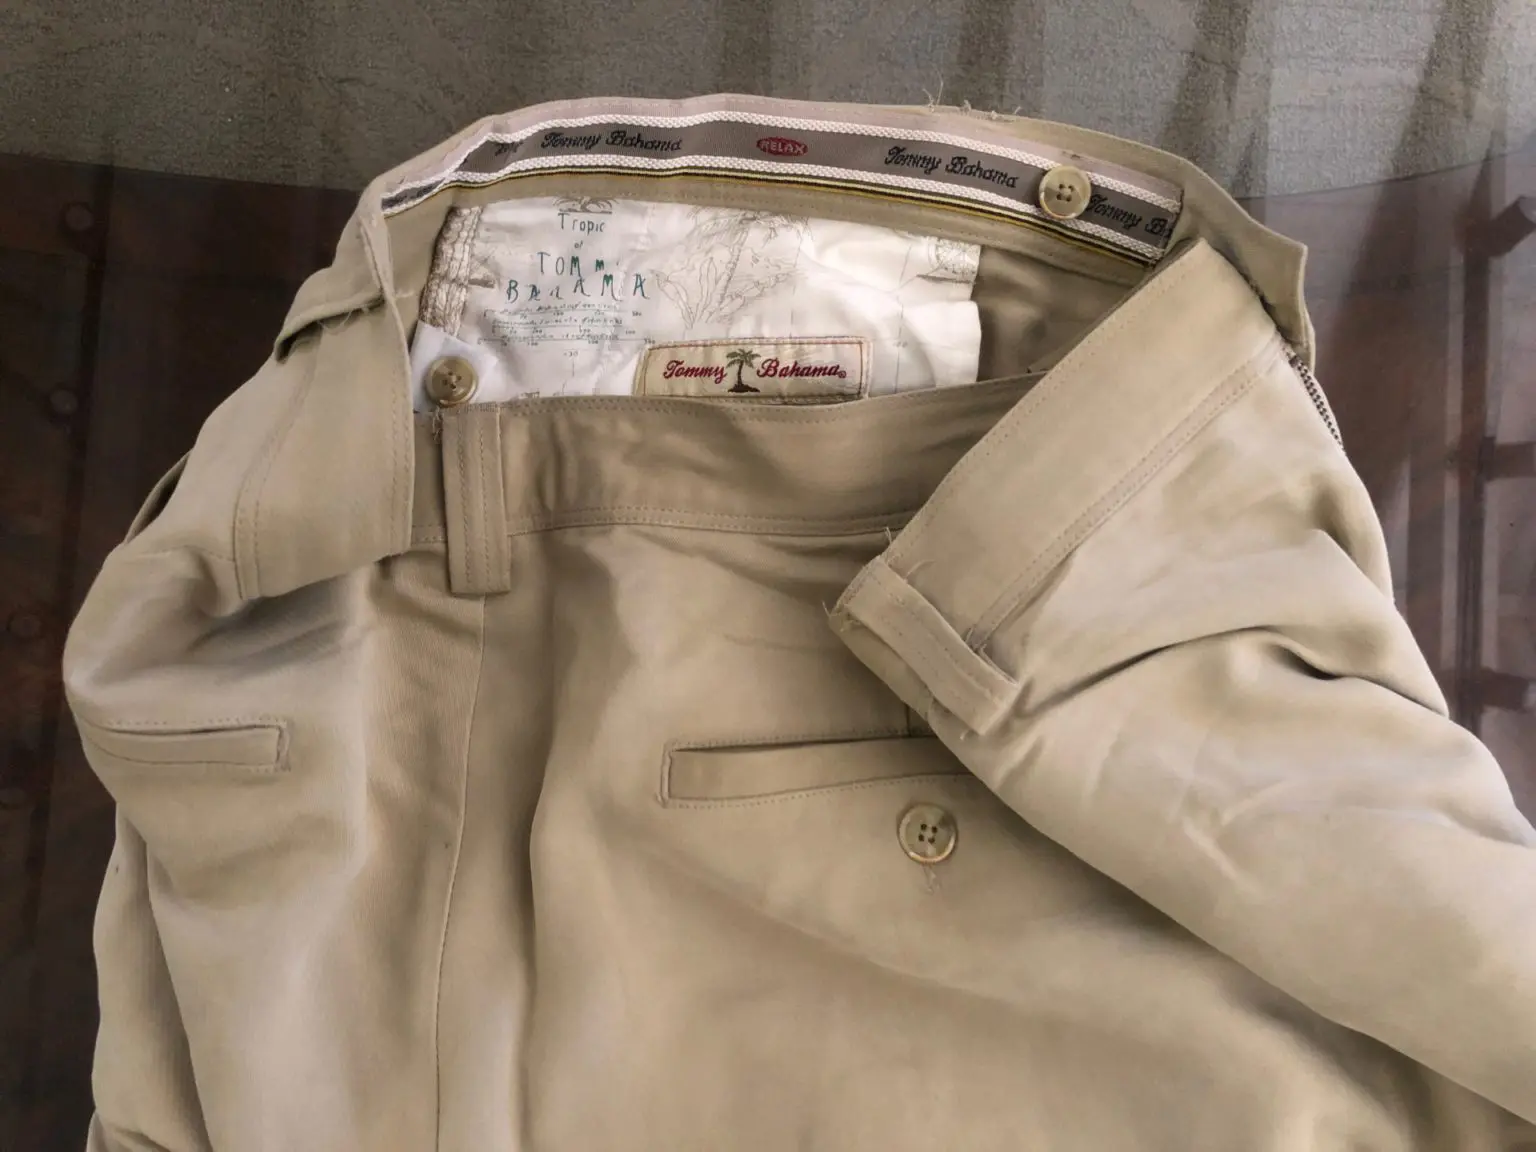 A close up of inner pants where the tag Tommy Bahamas can be seen